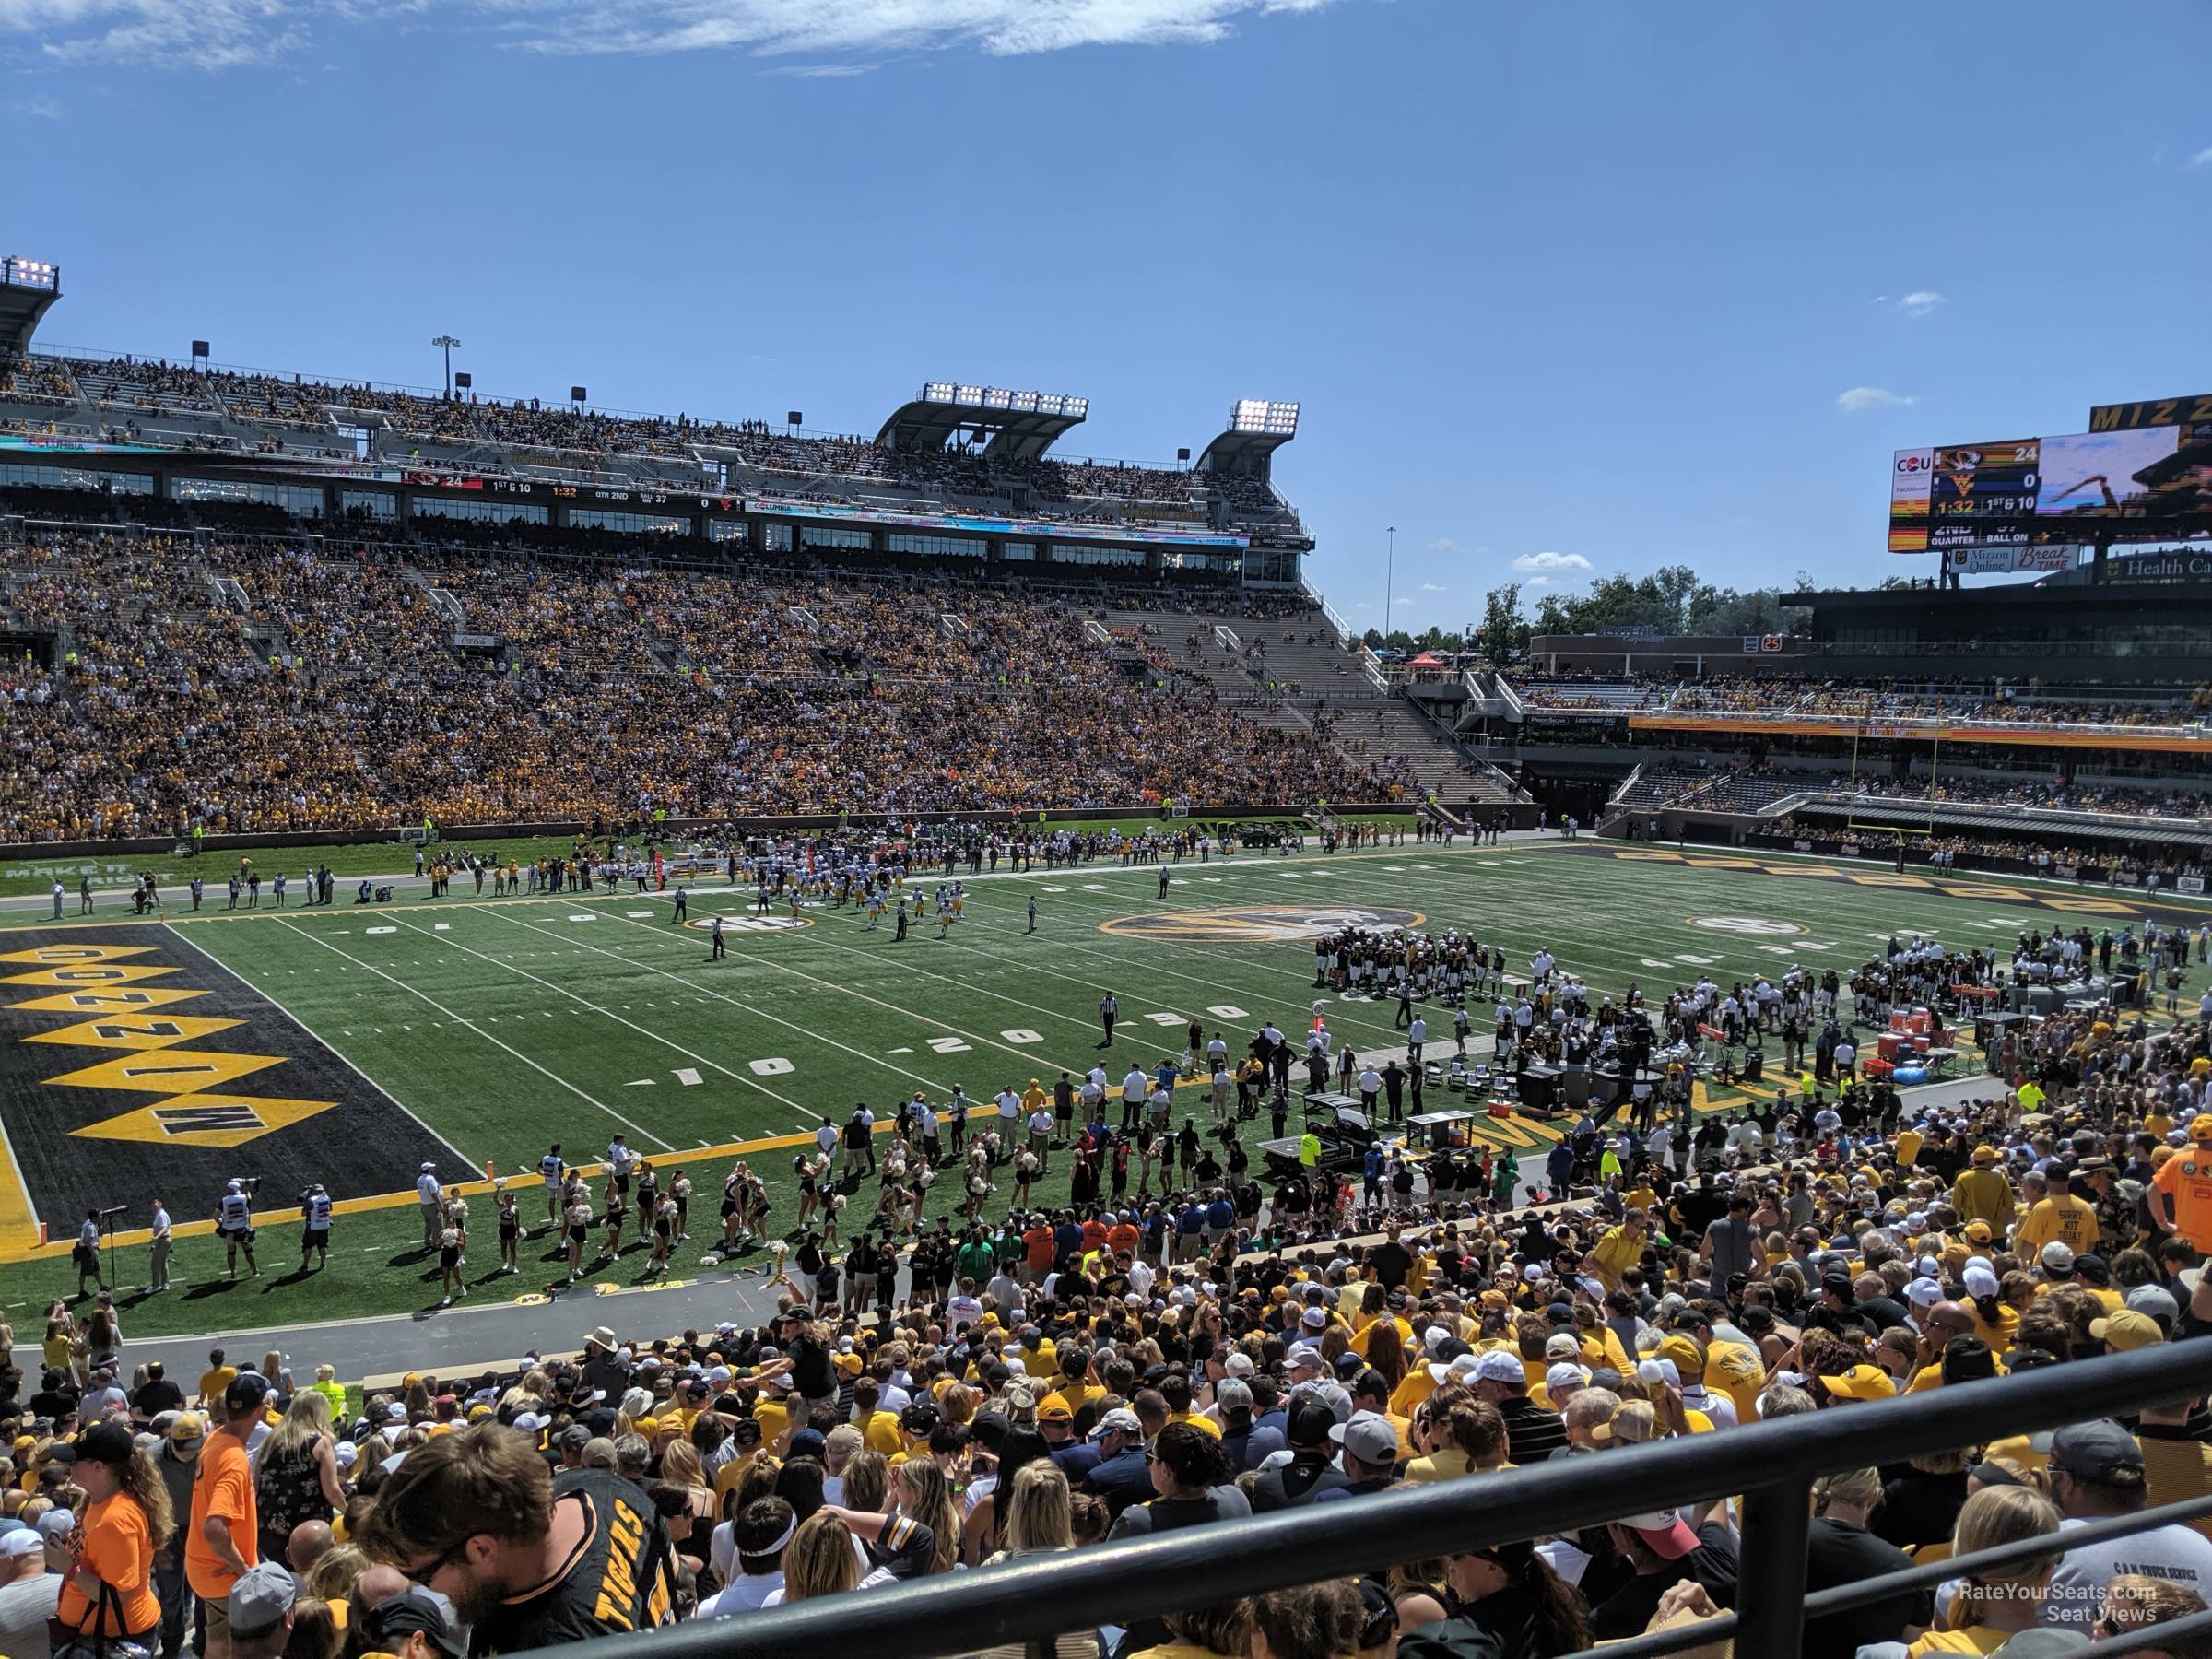 section 117, row 38 seat view  - faurot field